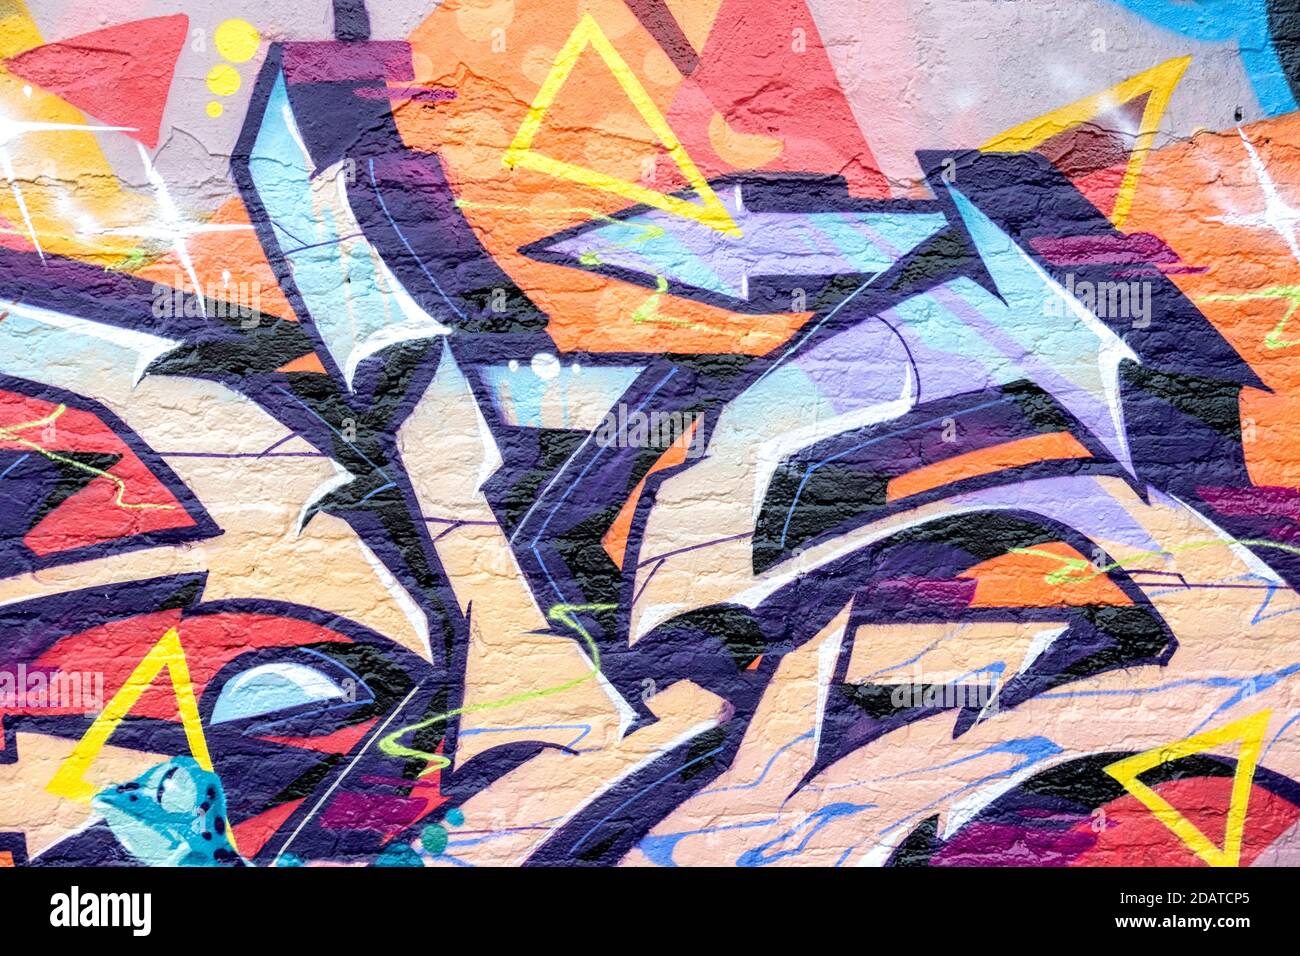 Colorful and abstract generic wall graffiti Stock Photo